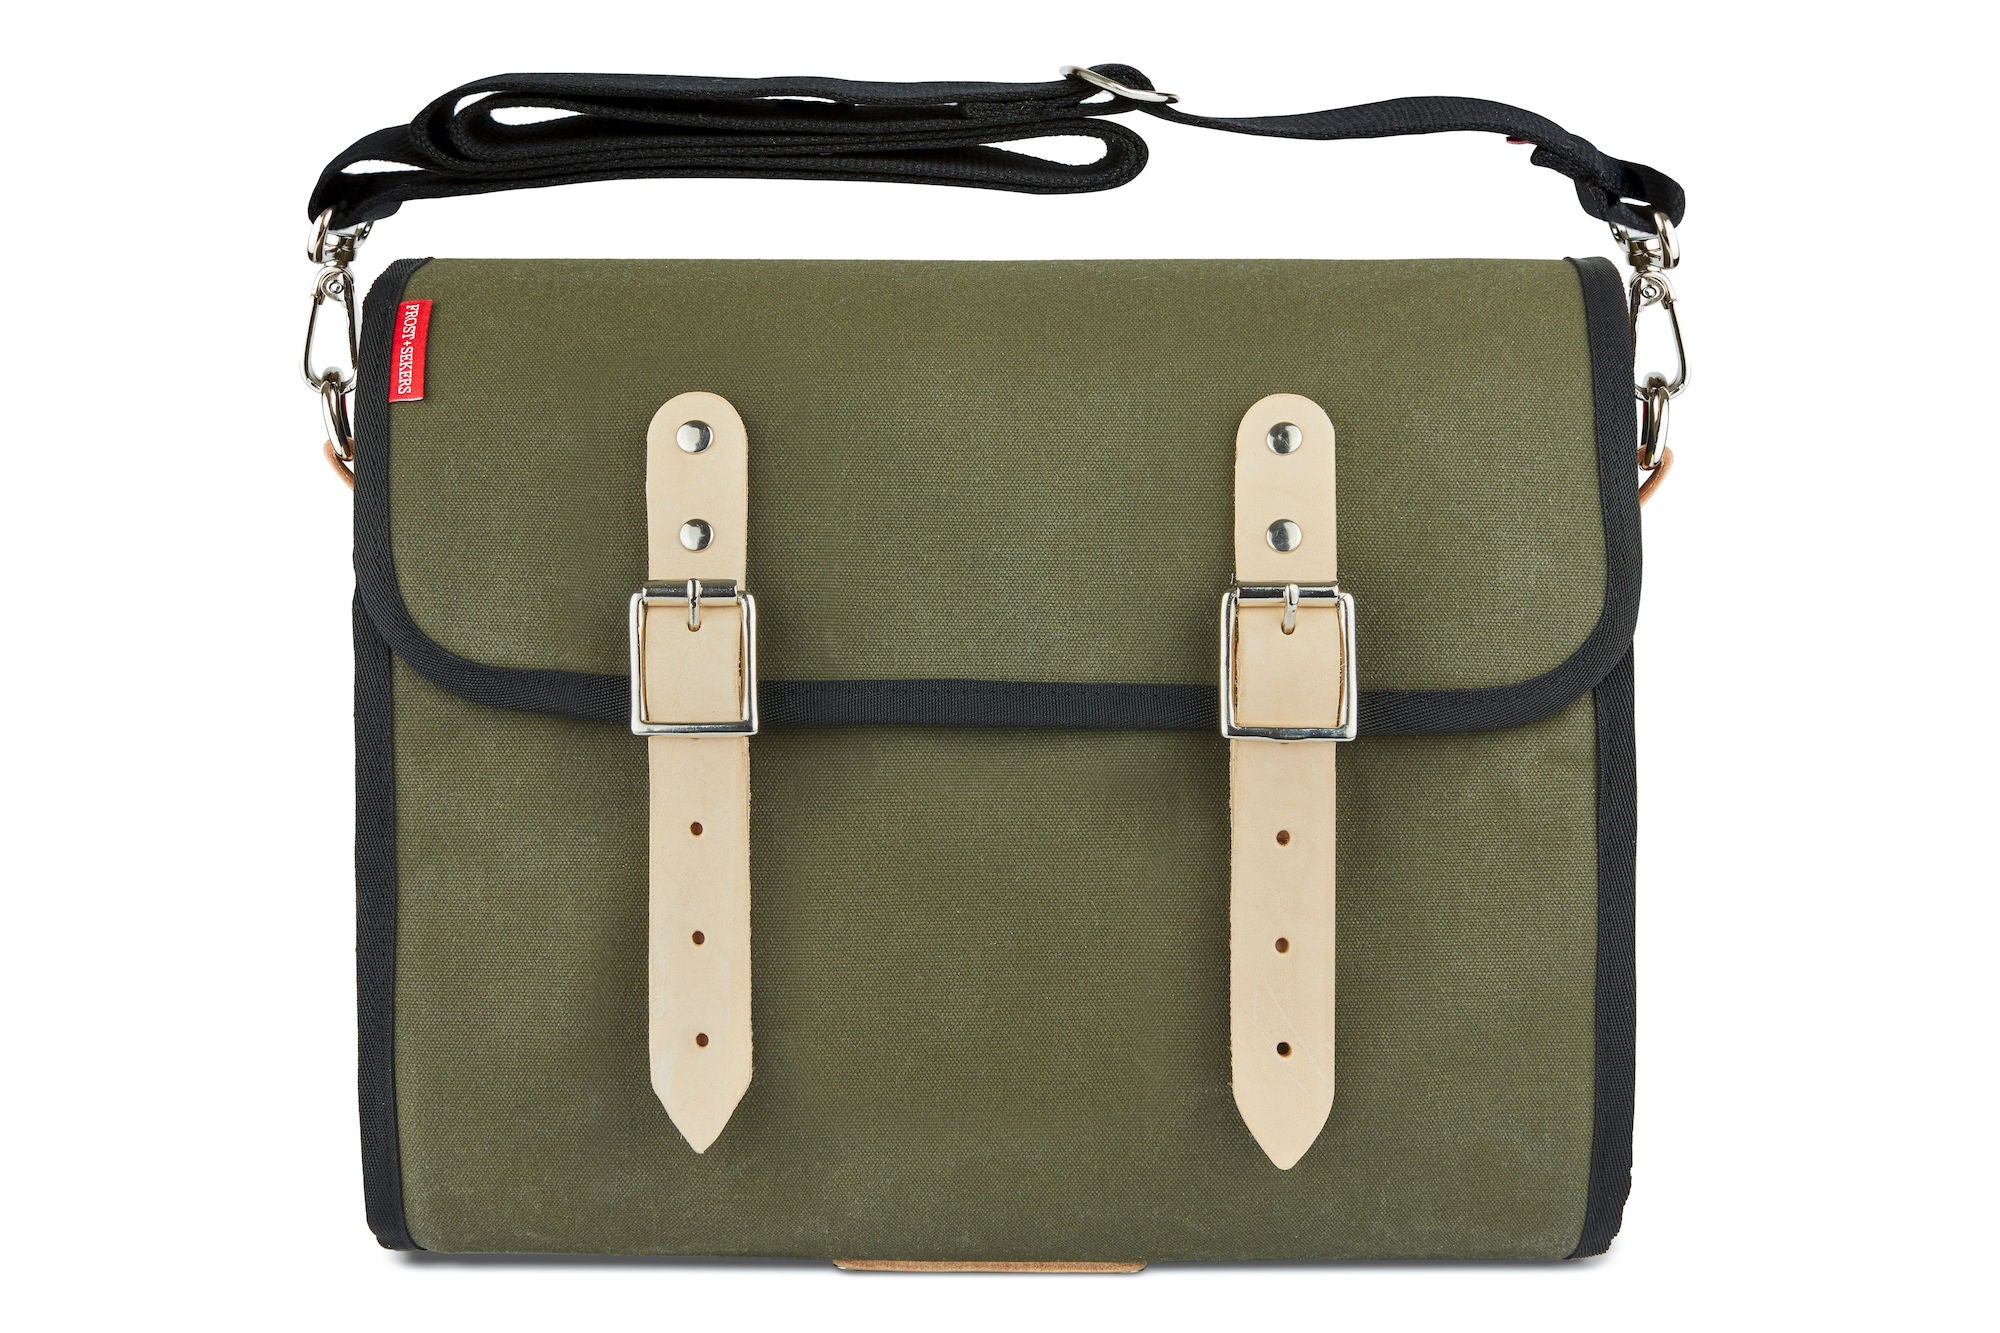 Frost and Sekers Marvin saddle bag. Green canvas with tan leather.